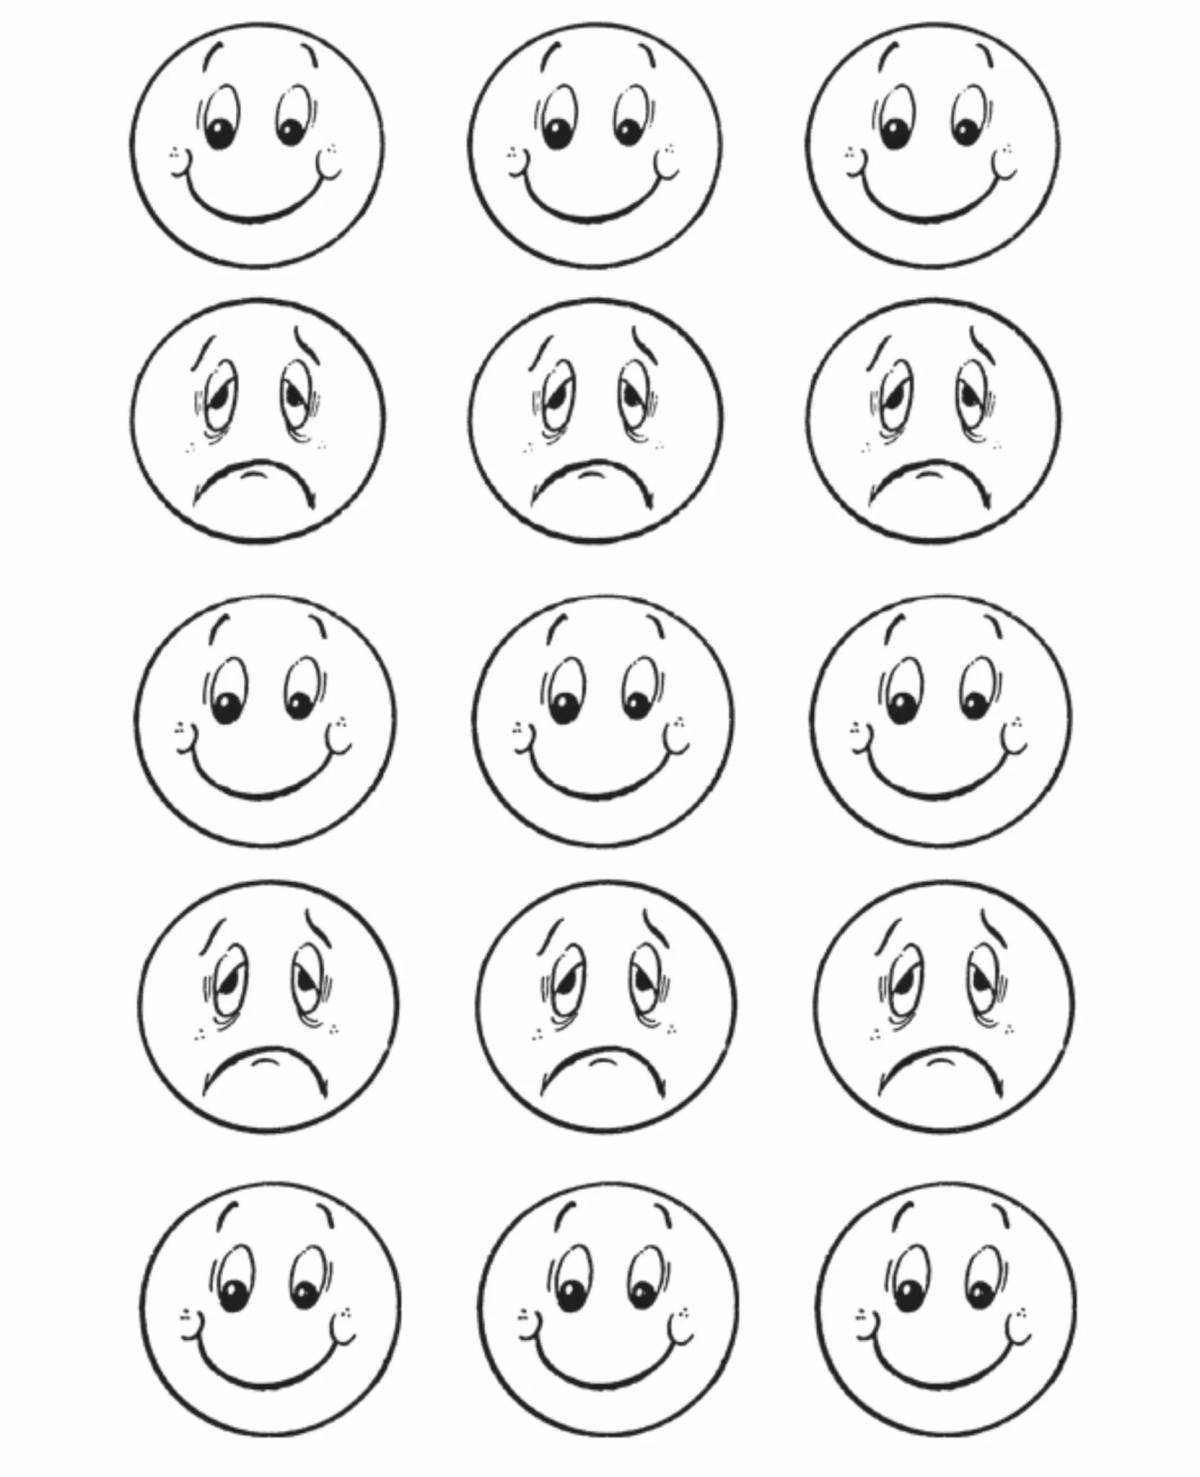 Lovely coloring book emotions and feelings for kids